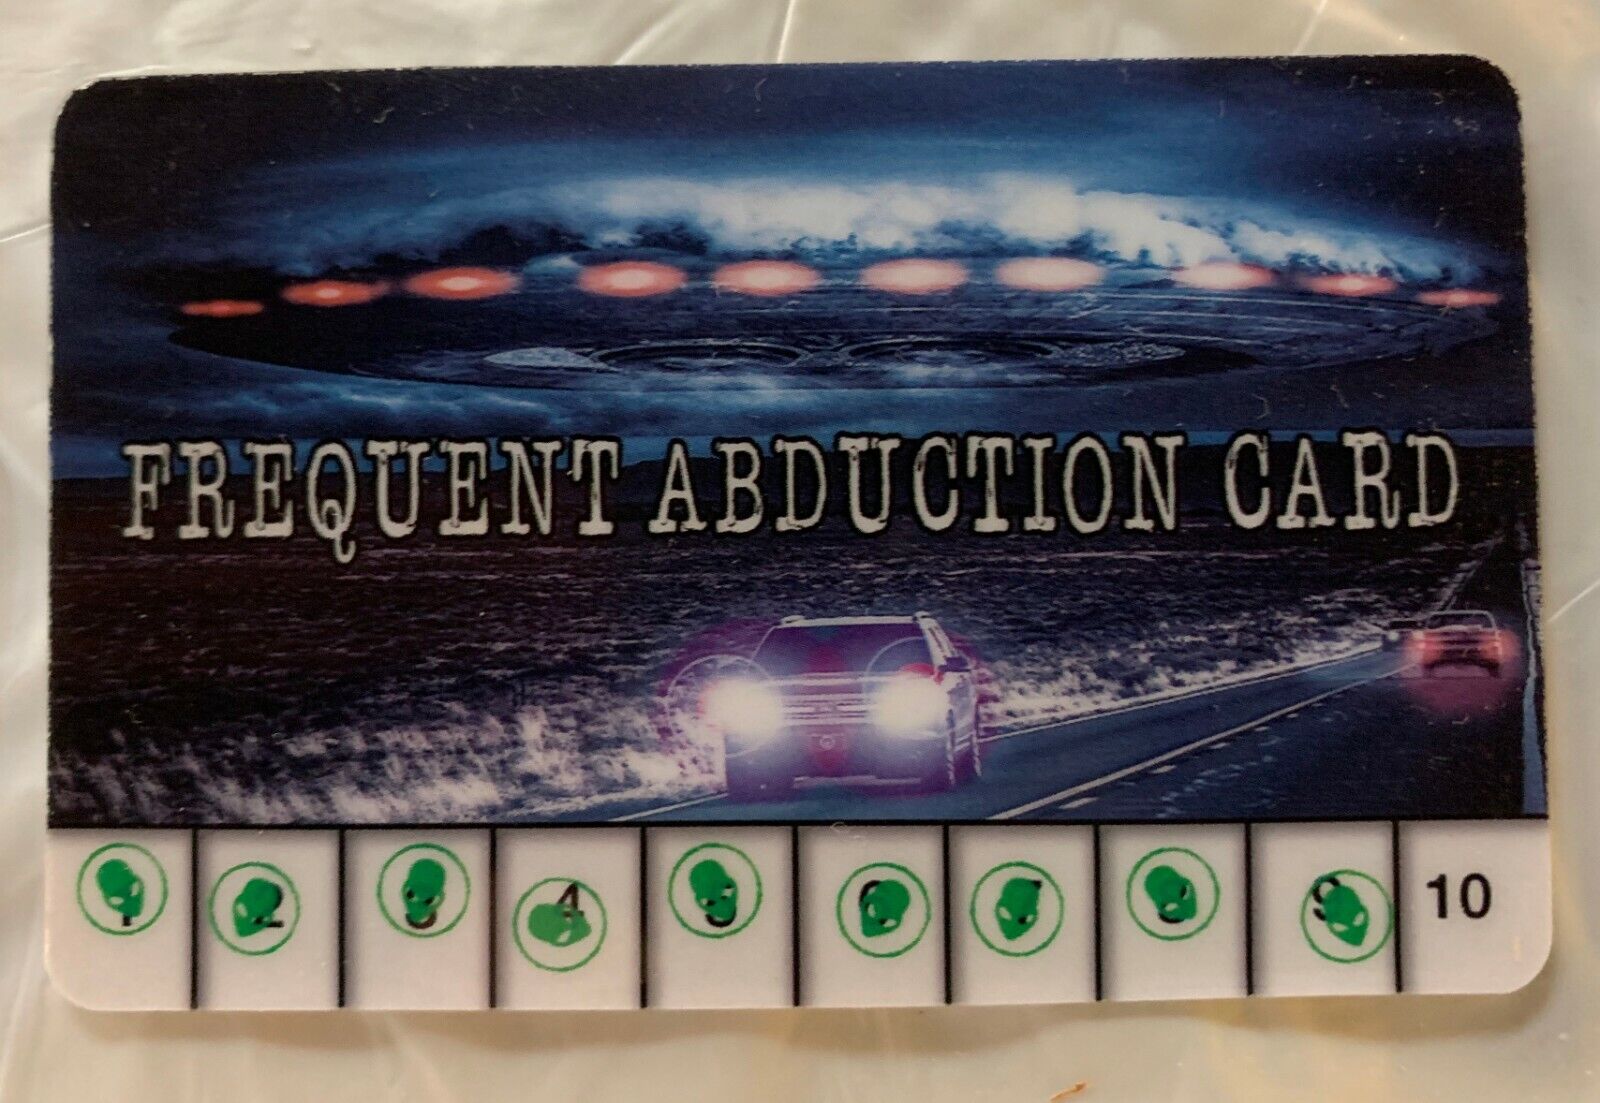 UFO Alien Frequent Abduction Card Roswell New Mexico Area 51 Saucer Spaceship